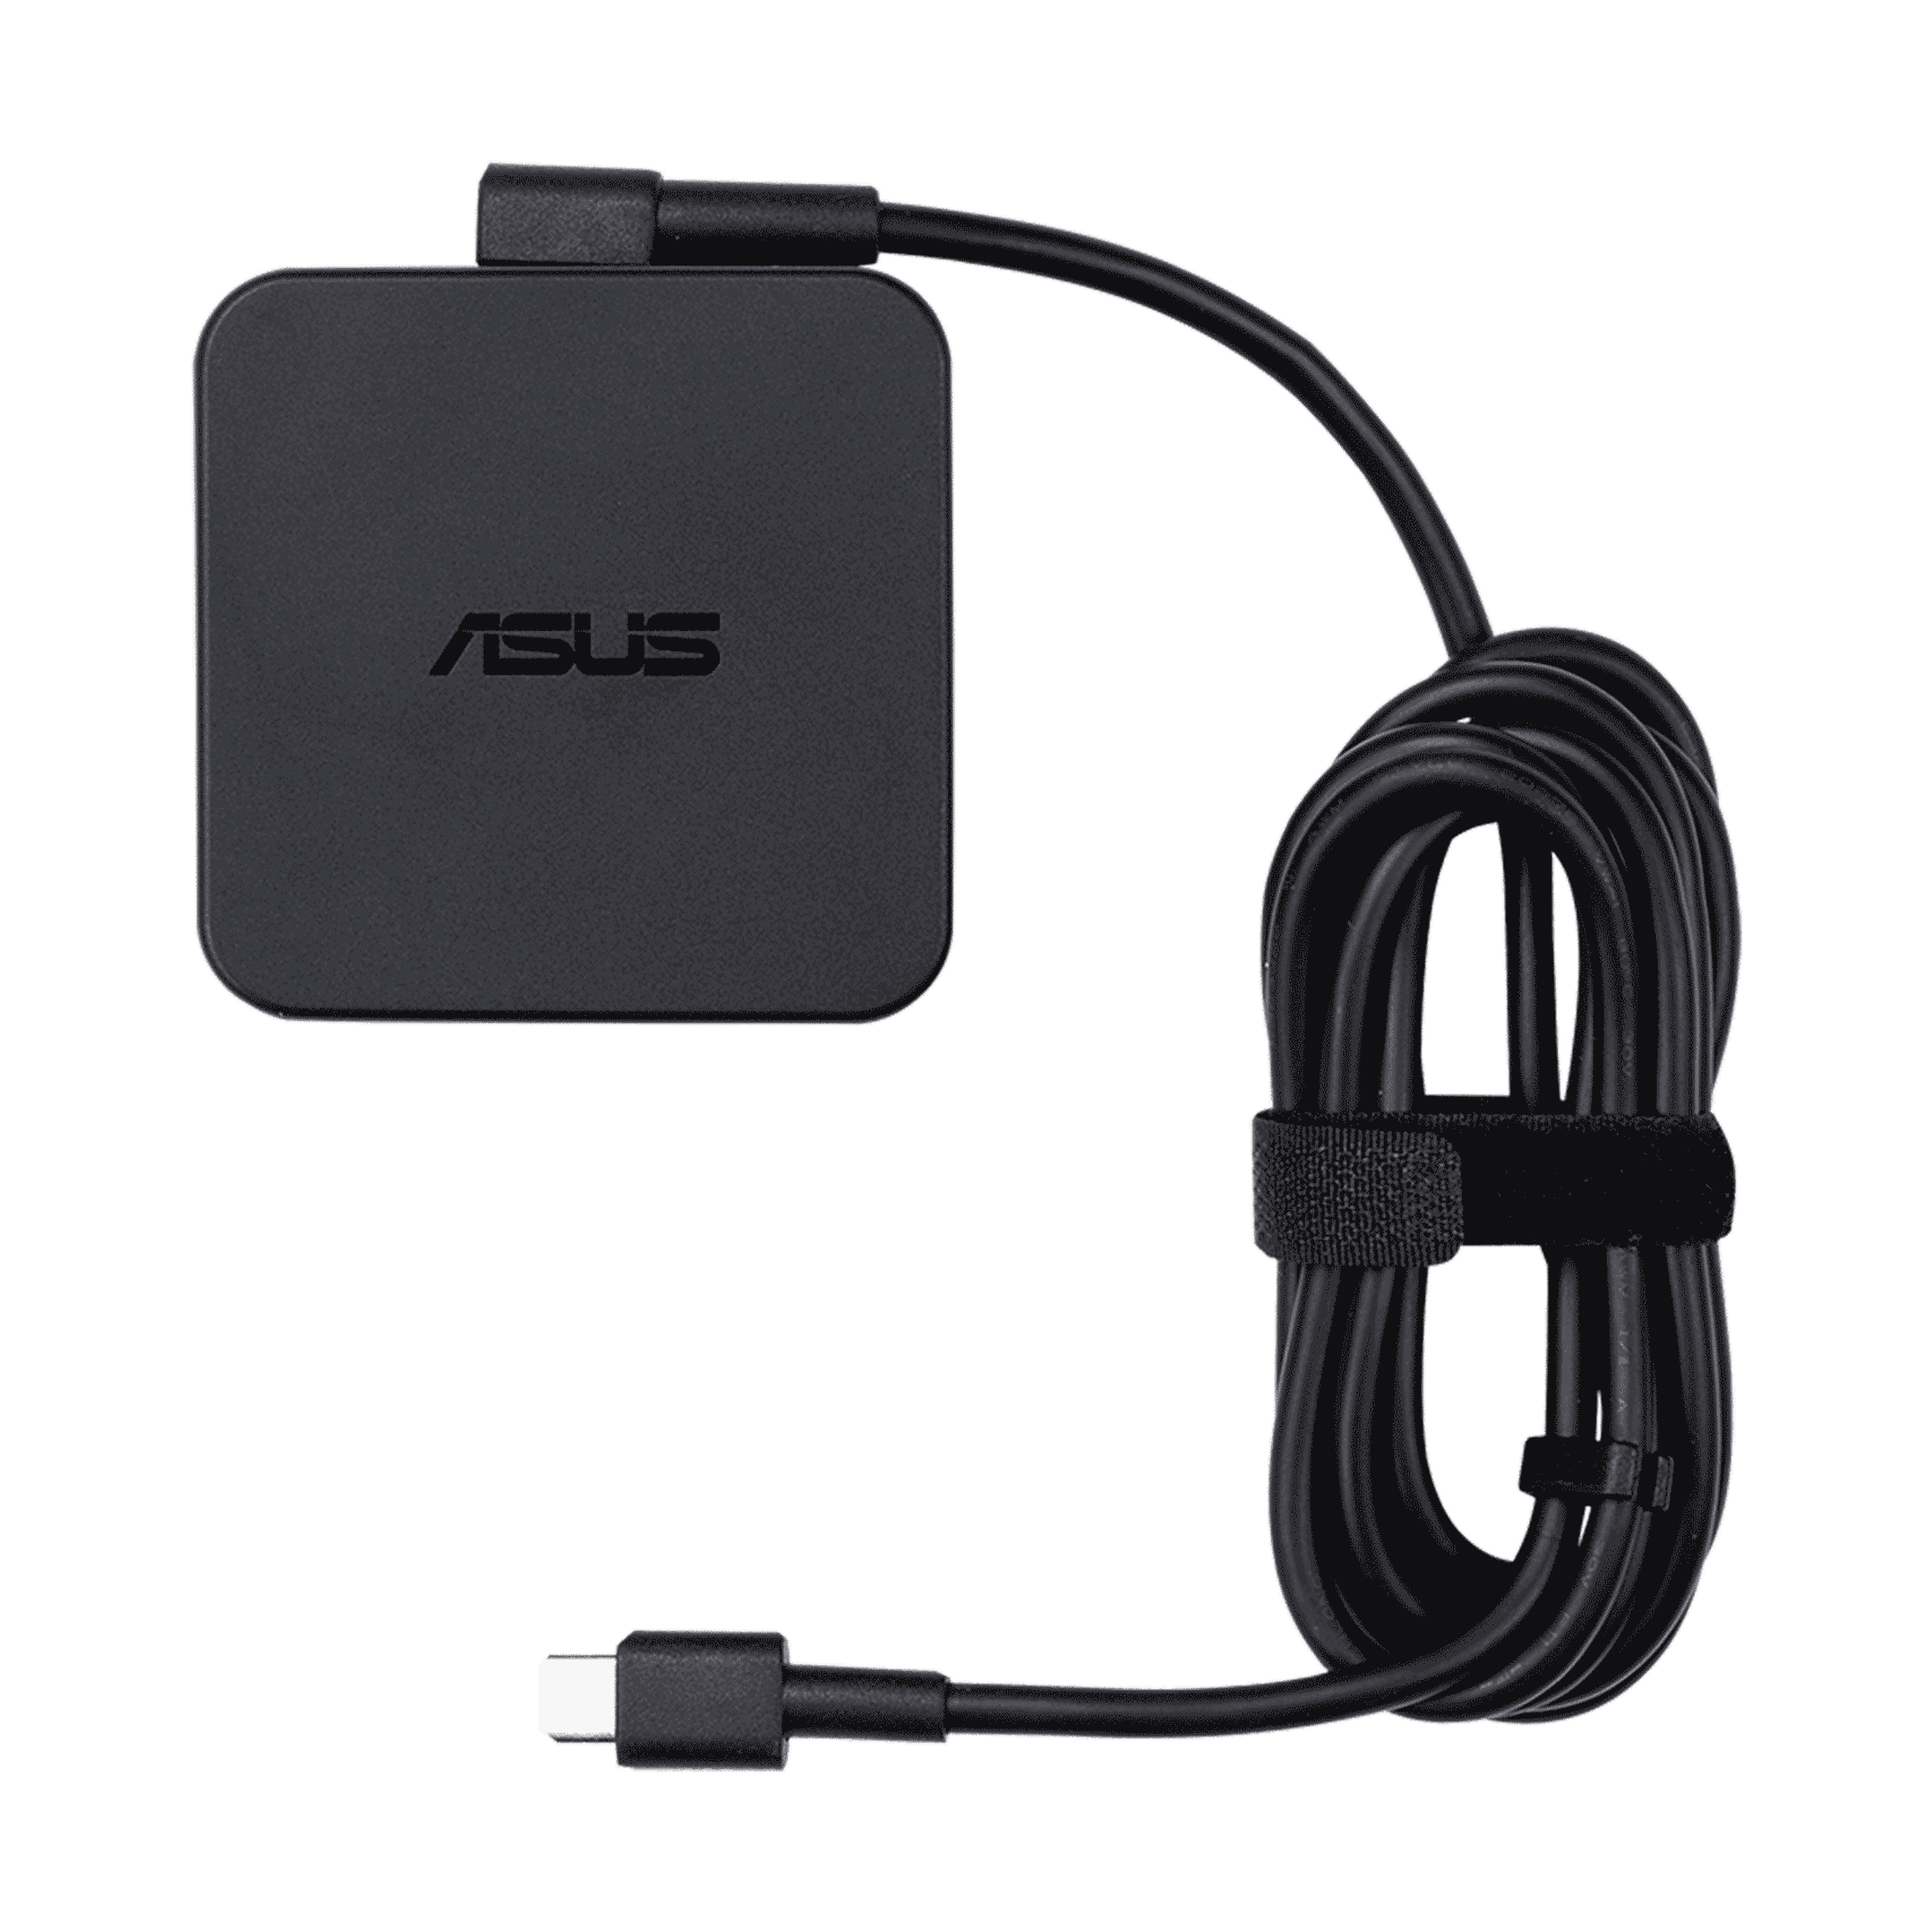 Cable Type C Braided 3ft Charge and Sync Cable for ASUS ZenBook 13 - USB-C to USB-C UX333 - Jet Black 3ft DirectSync PD Cable ASUS ZenBook 13 UX333 100W BoxWave 